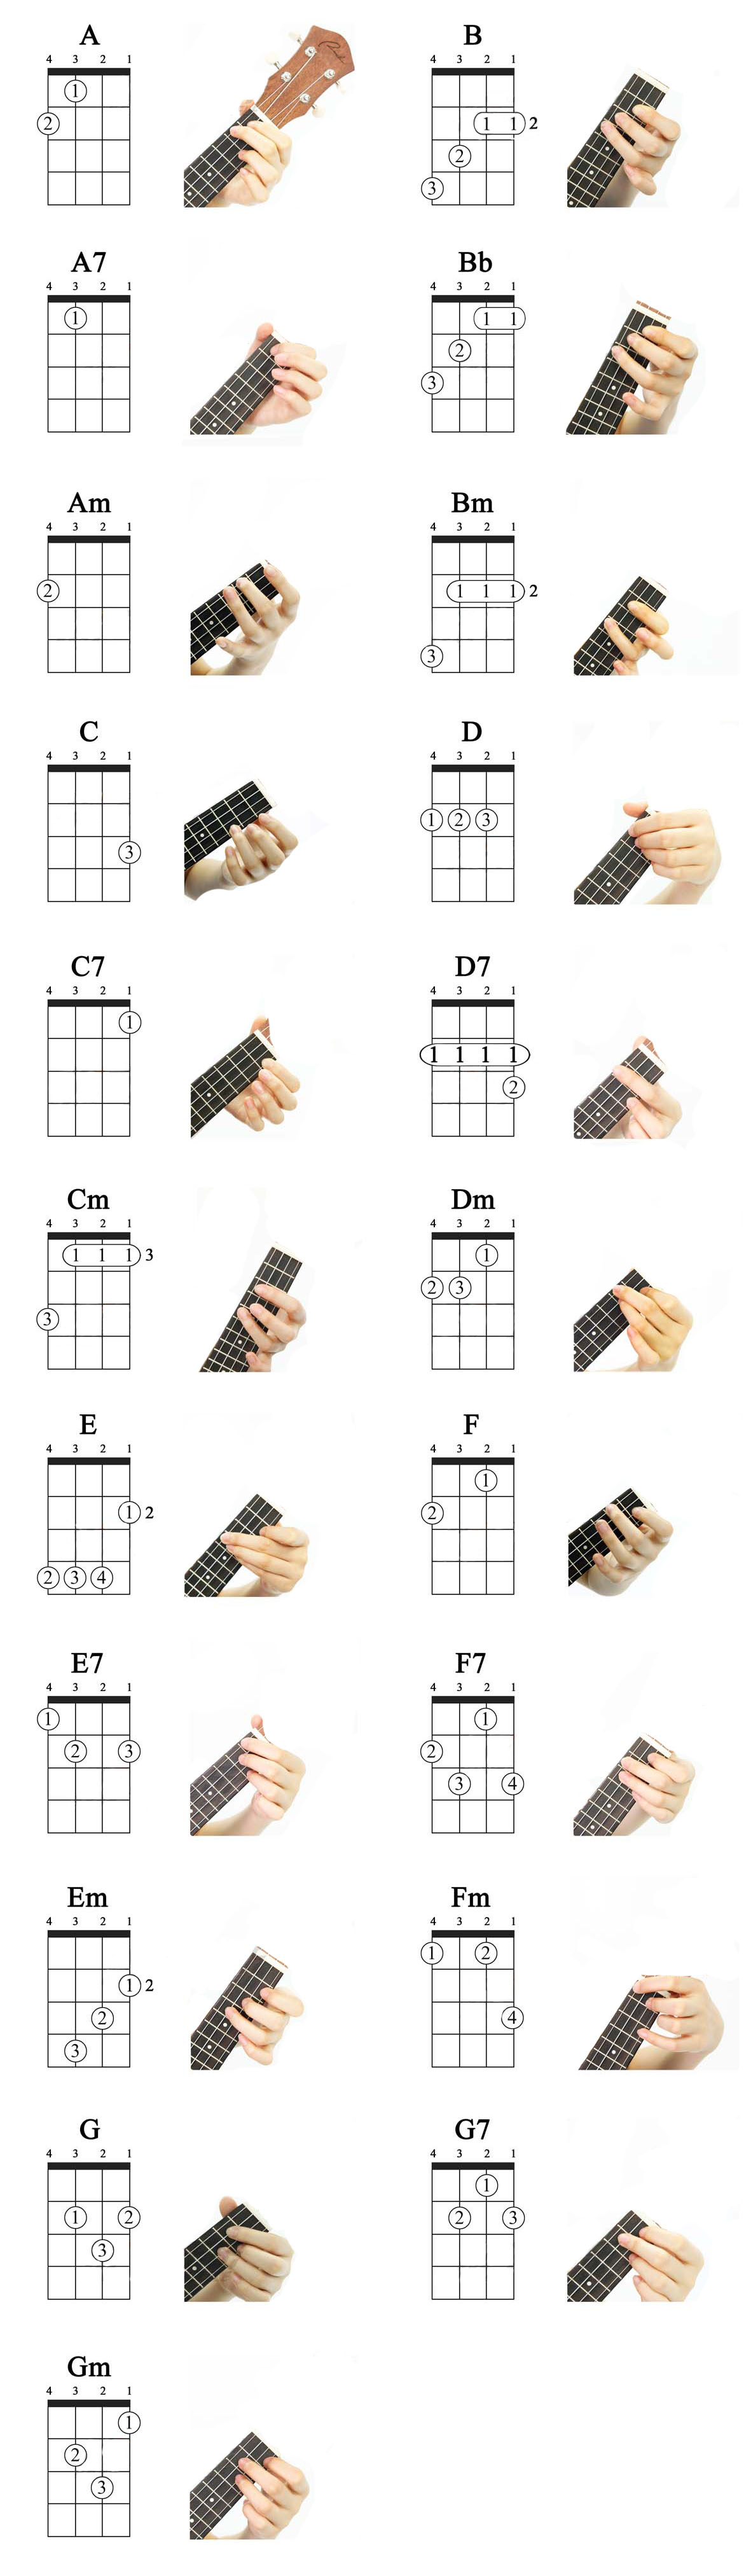 all ukulele chords with finger numbers